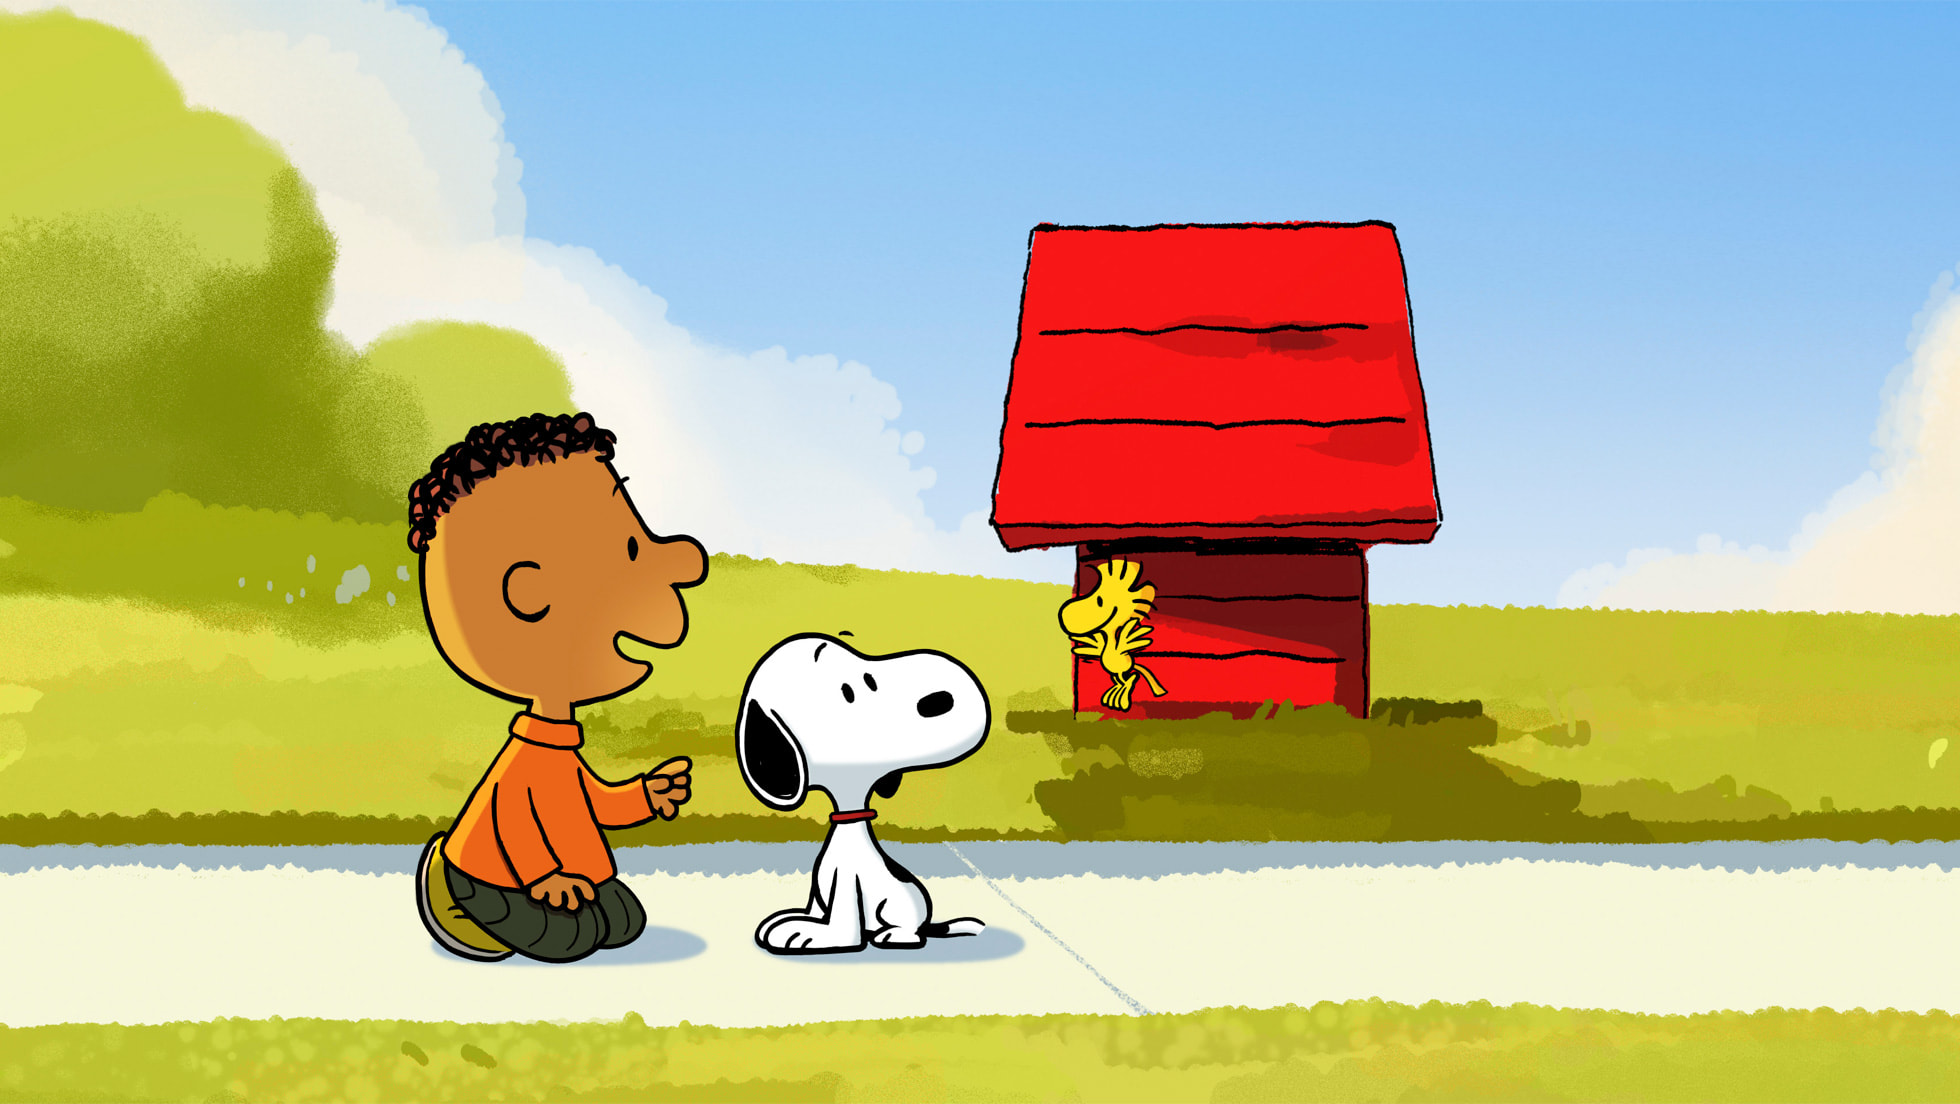 Snoopy Presents: Welcome Home, Franklin